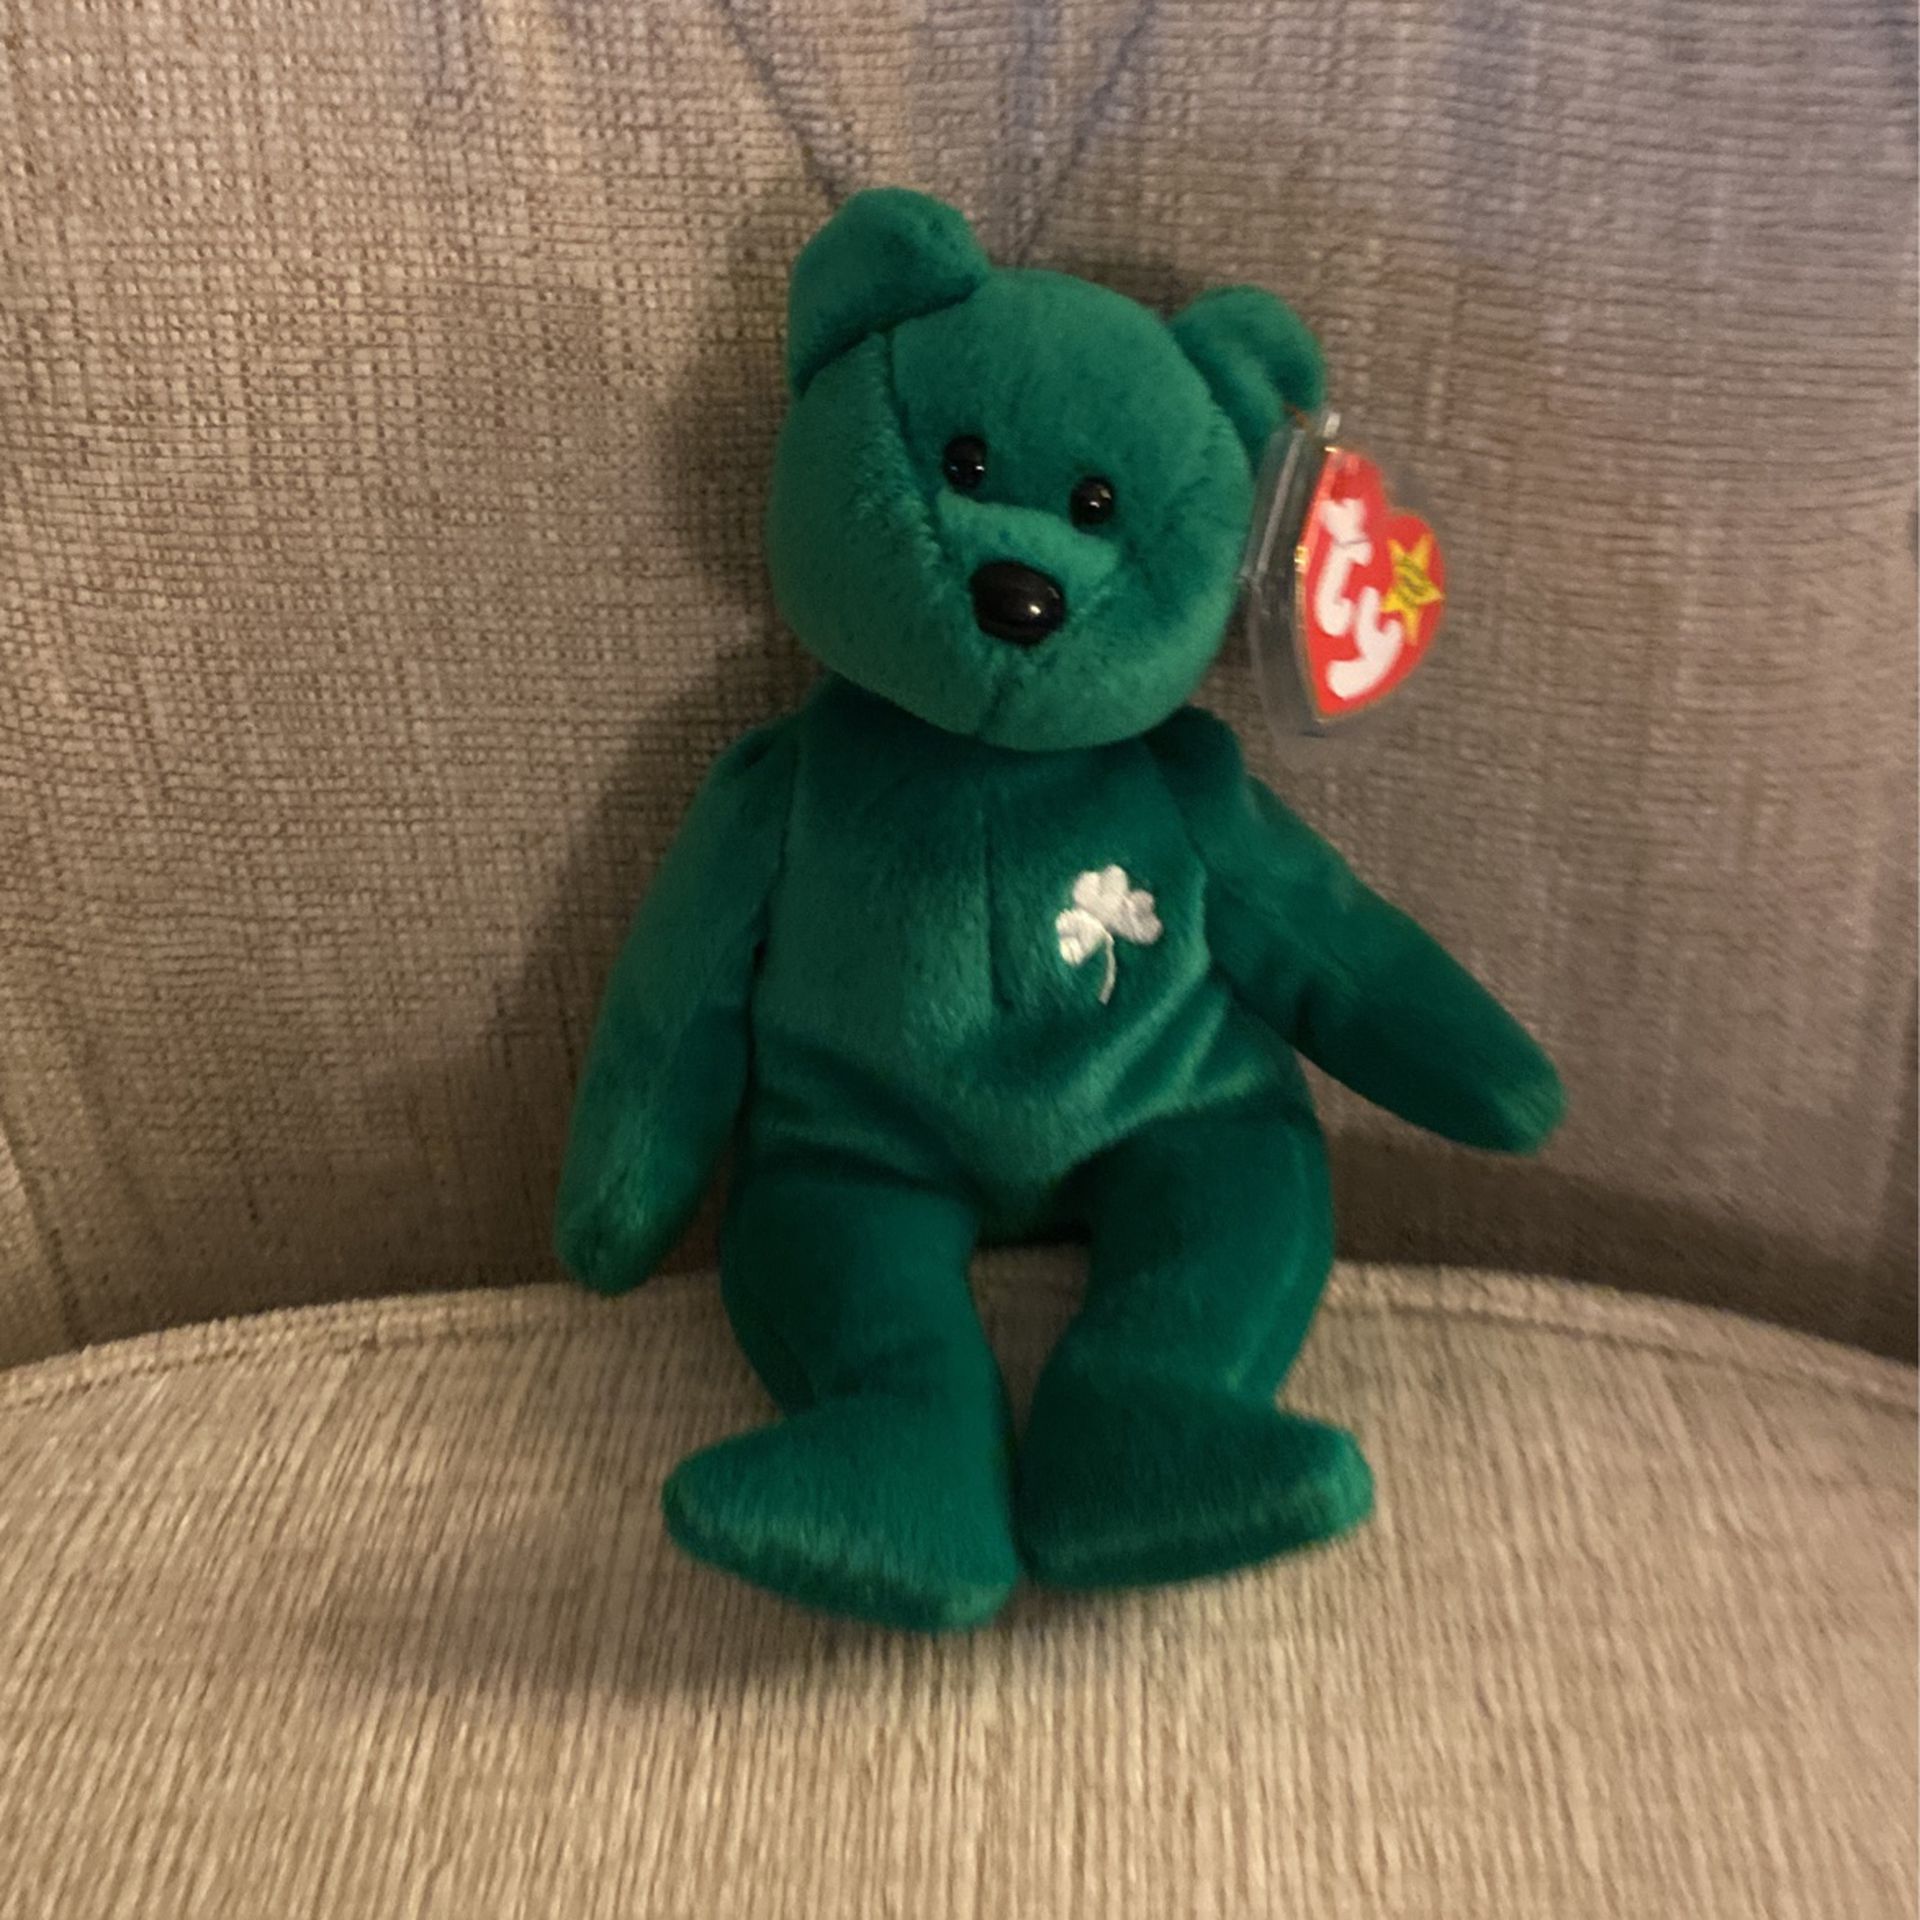 ERIN TY Beanie Baby Never Used Has Protector Tag